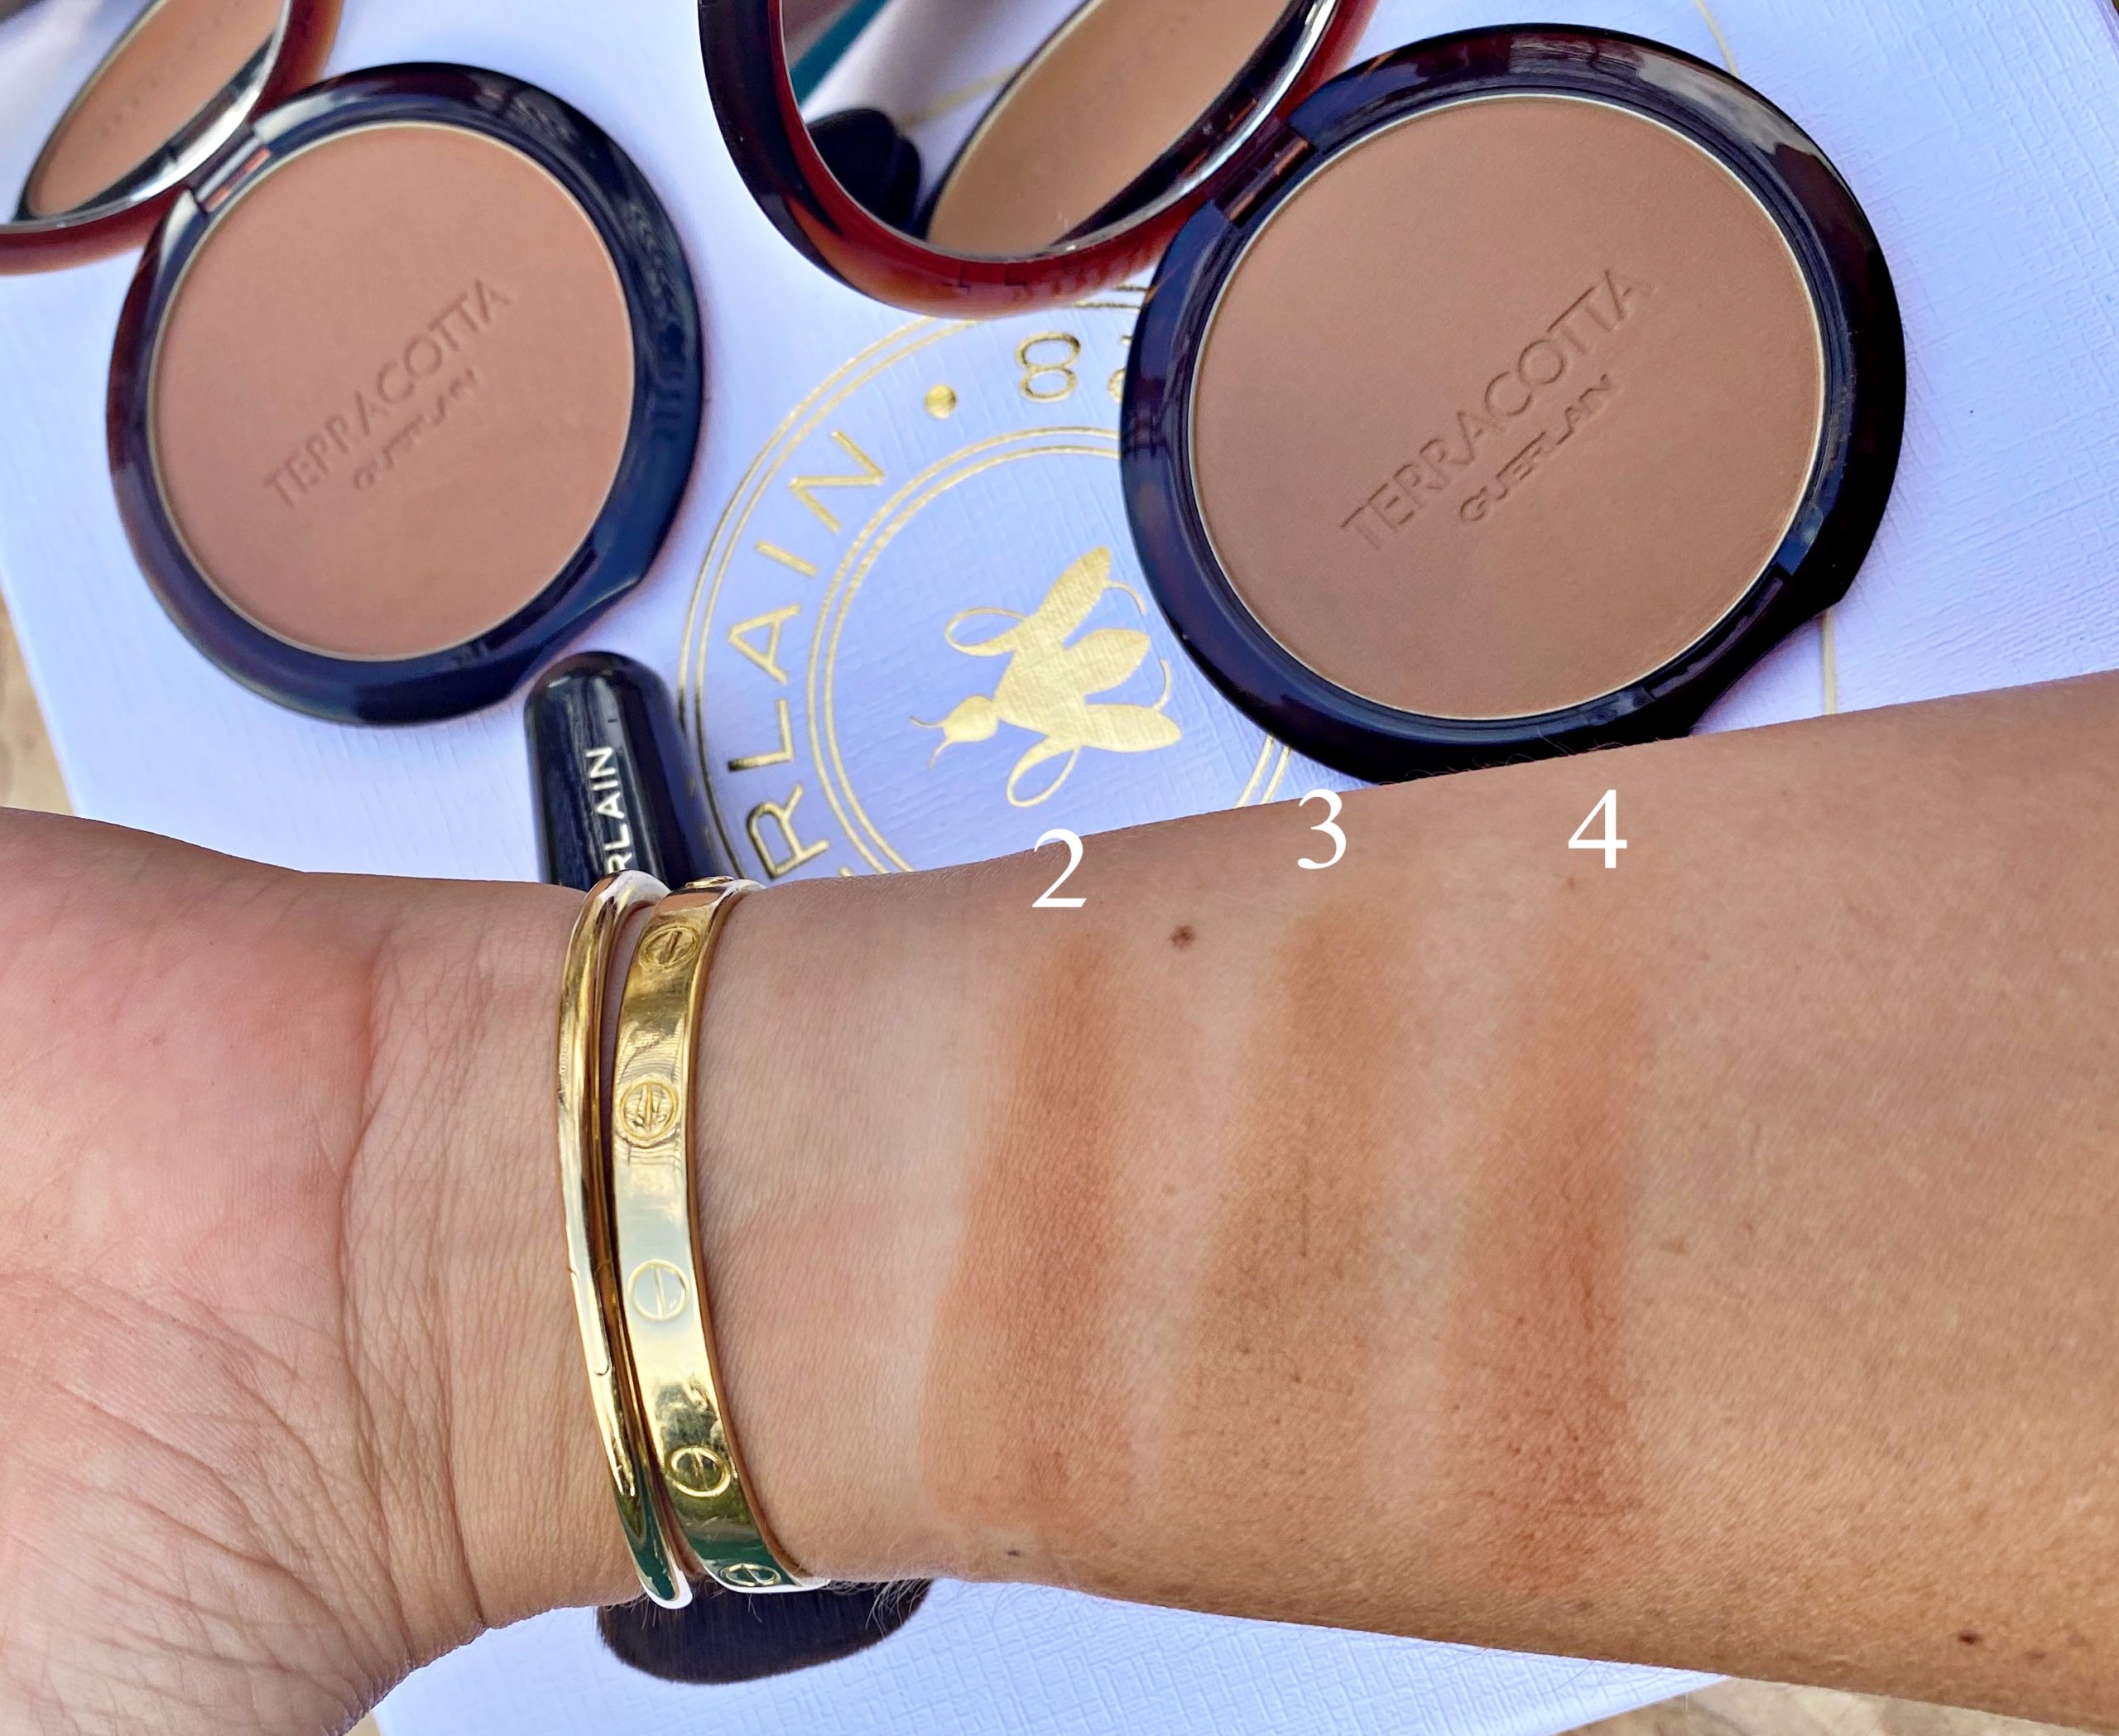 watches of the Guerlain Terracotta Sunkissed Natural Bronzer Powder